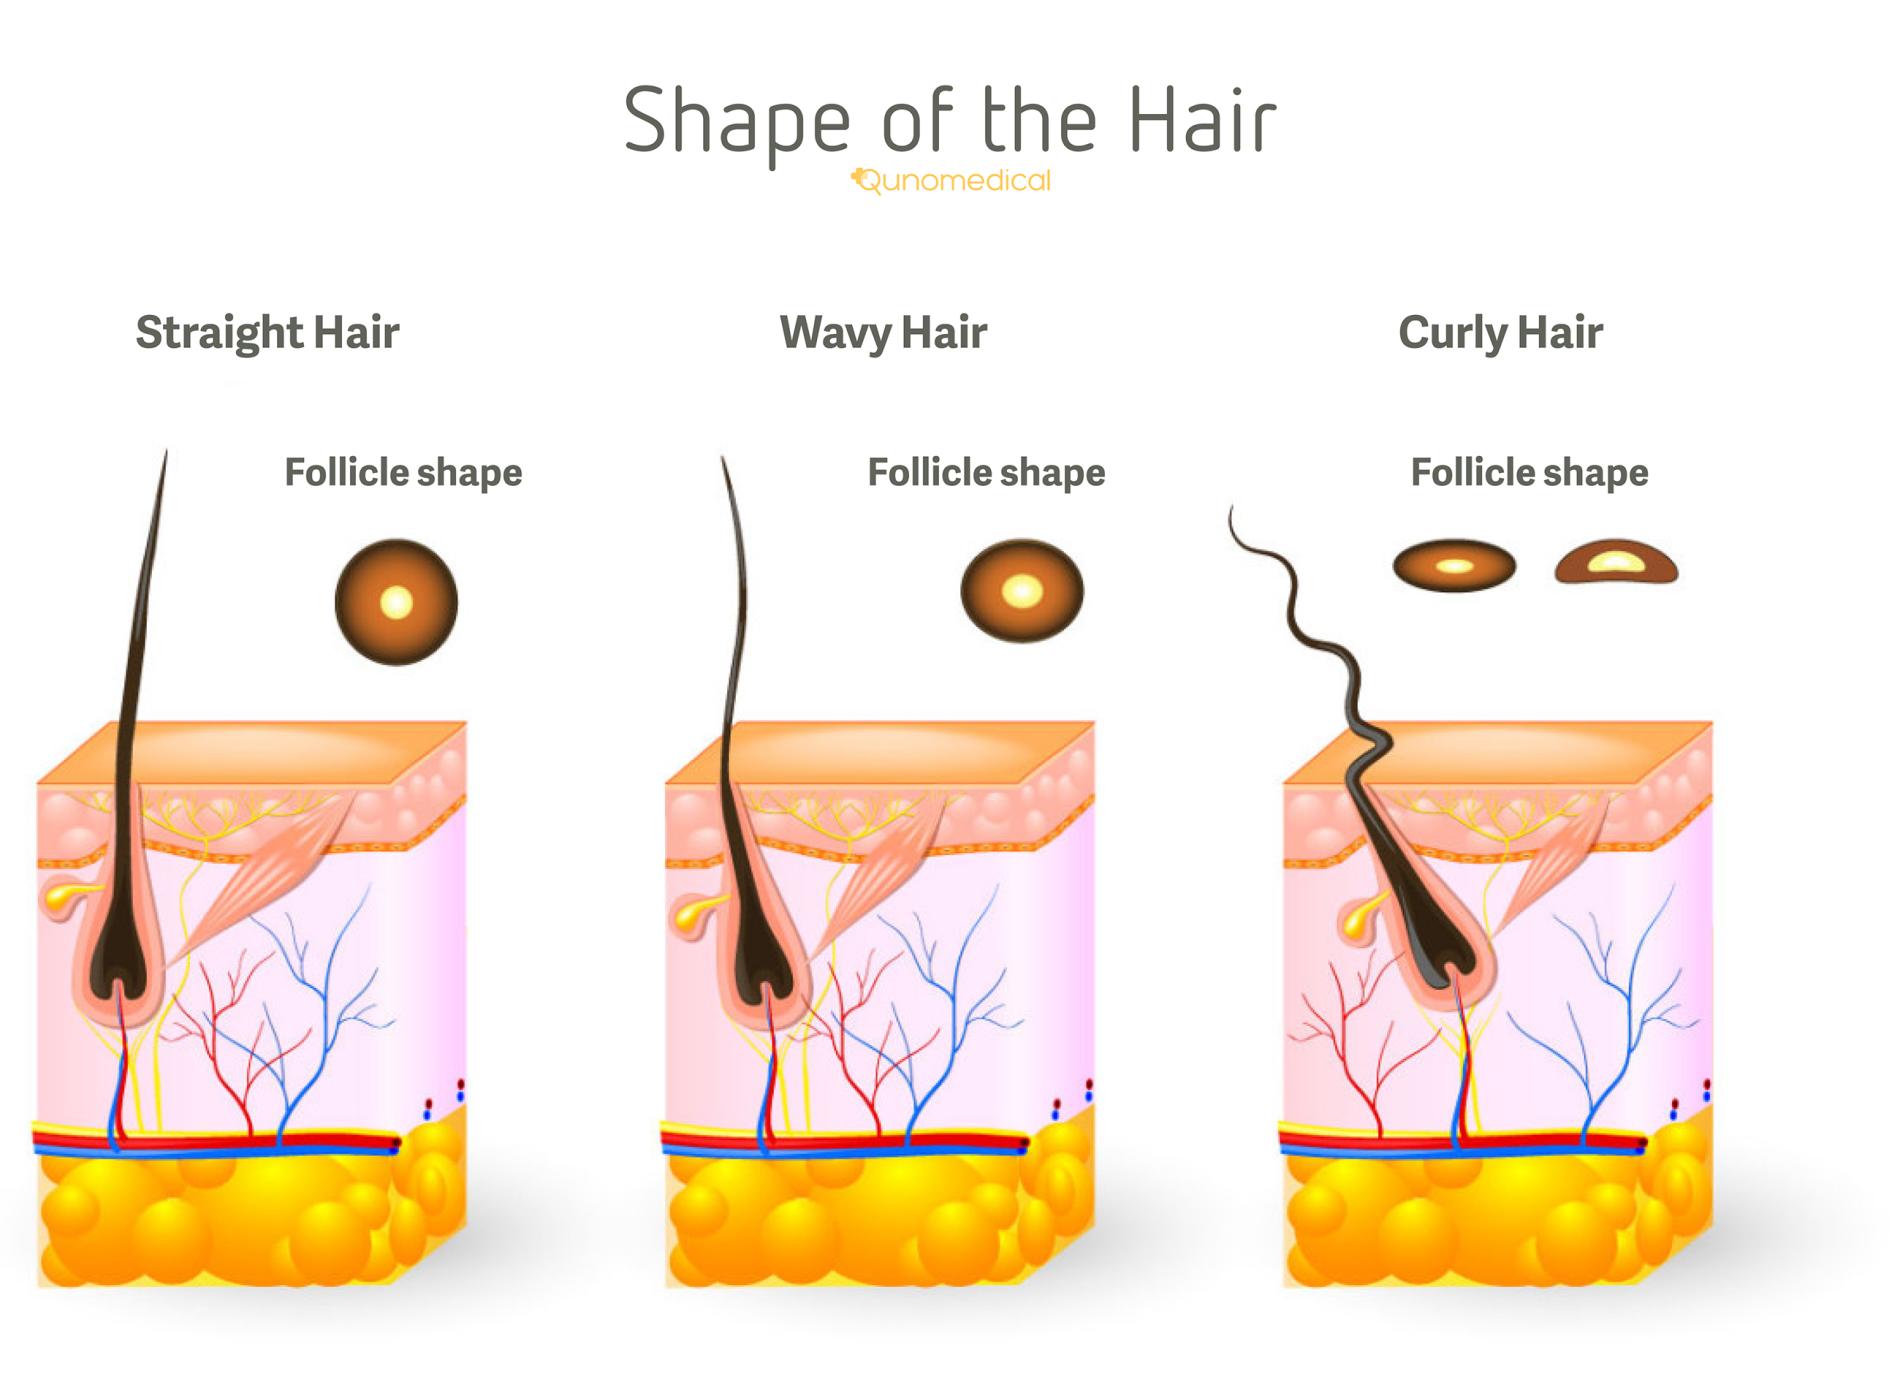 Illustration showing the different shapes of hair.